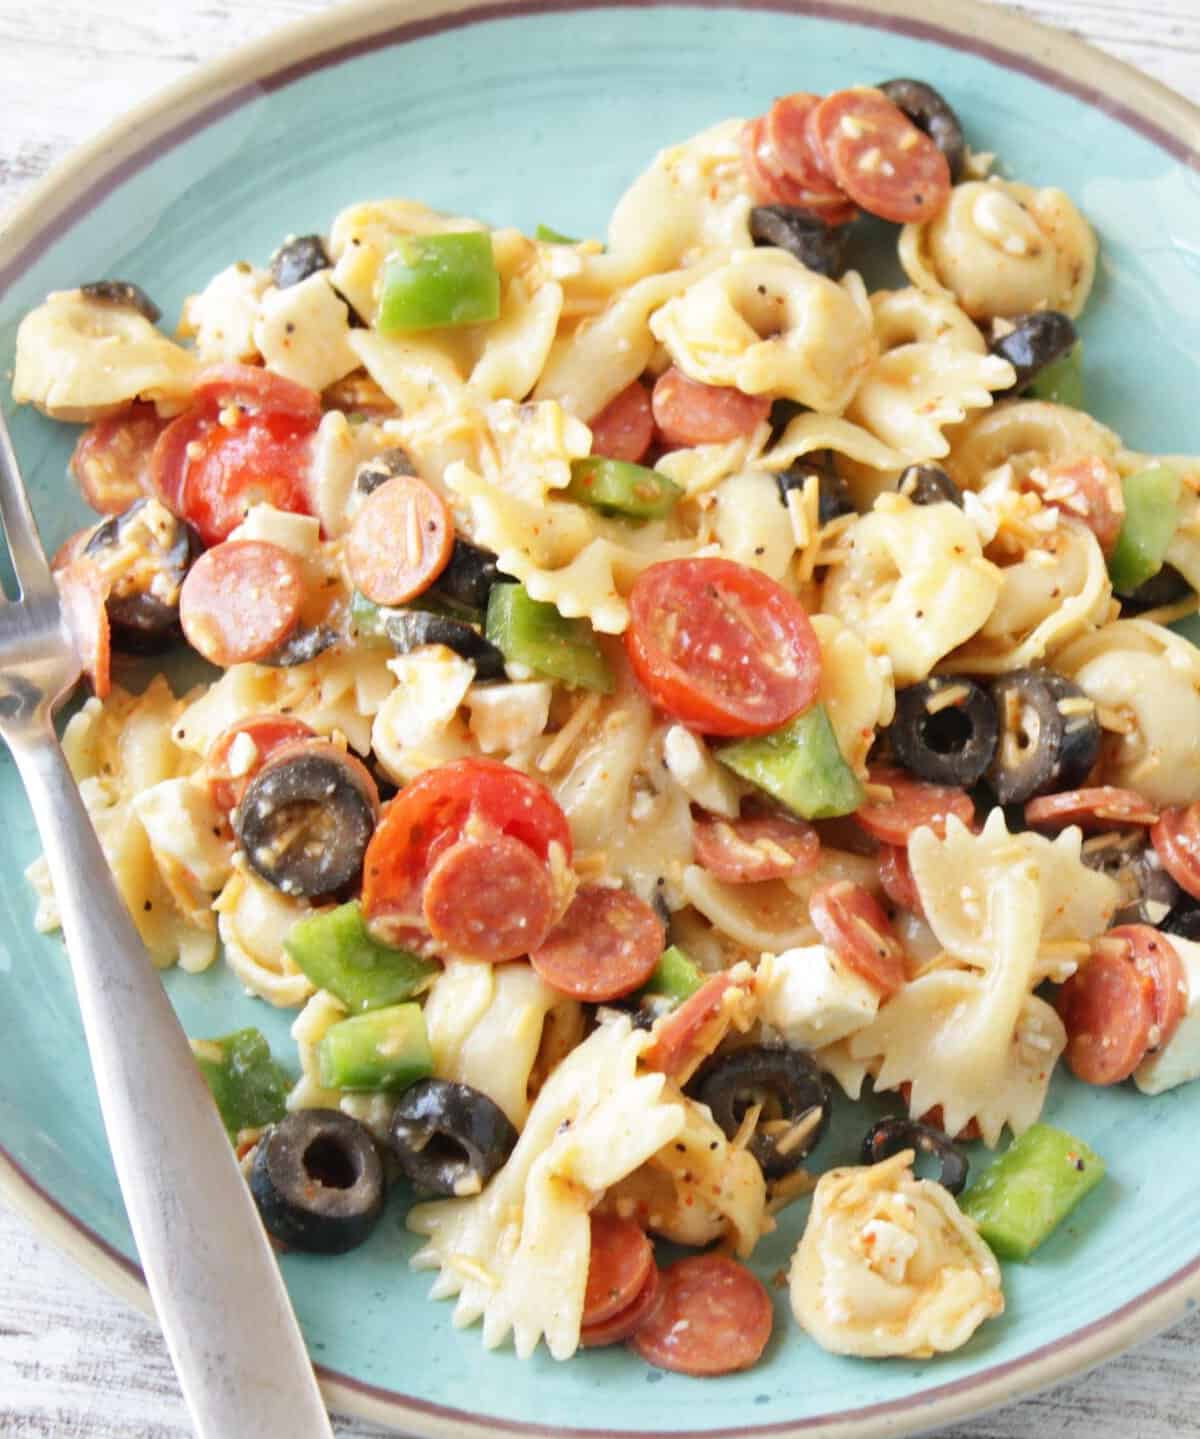  Say hello to your new go-to party dish: Tortellini and Bow Tie Pasta Salad.